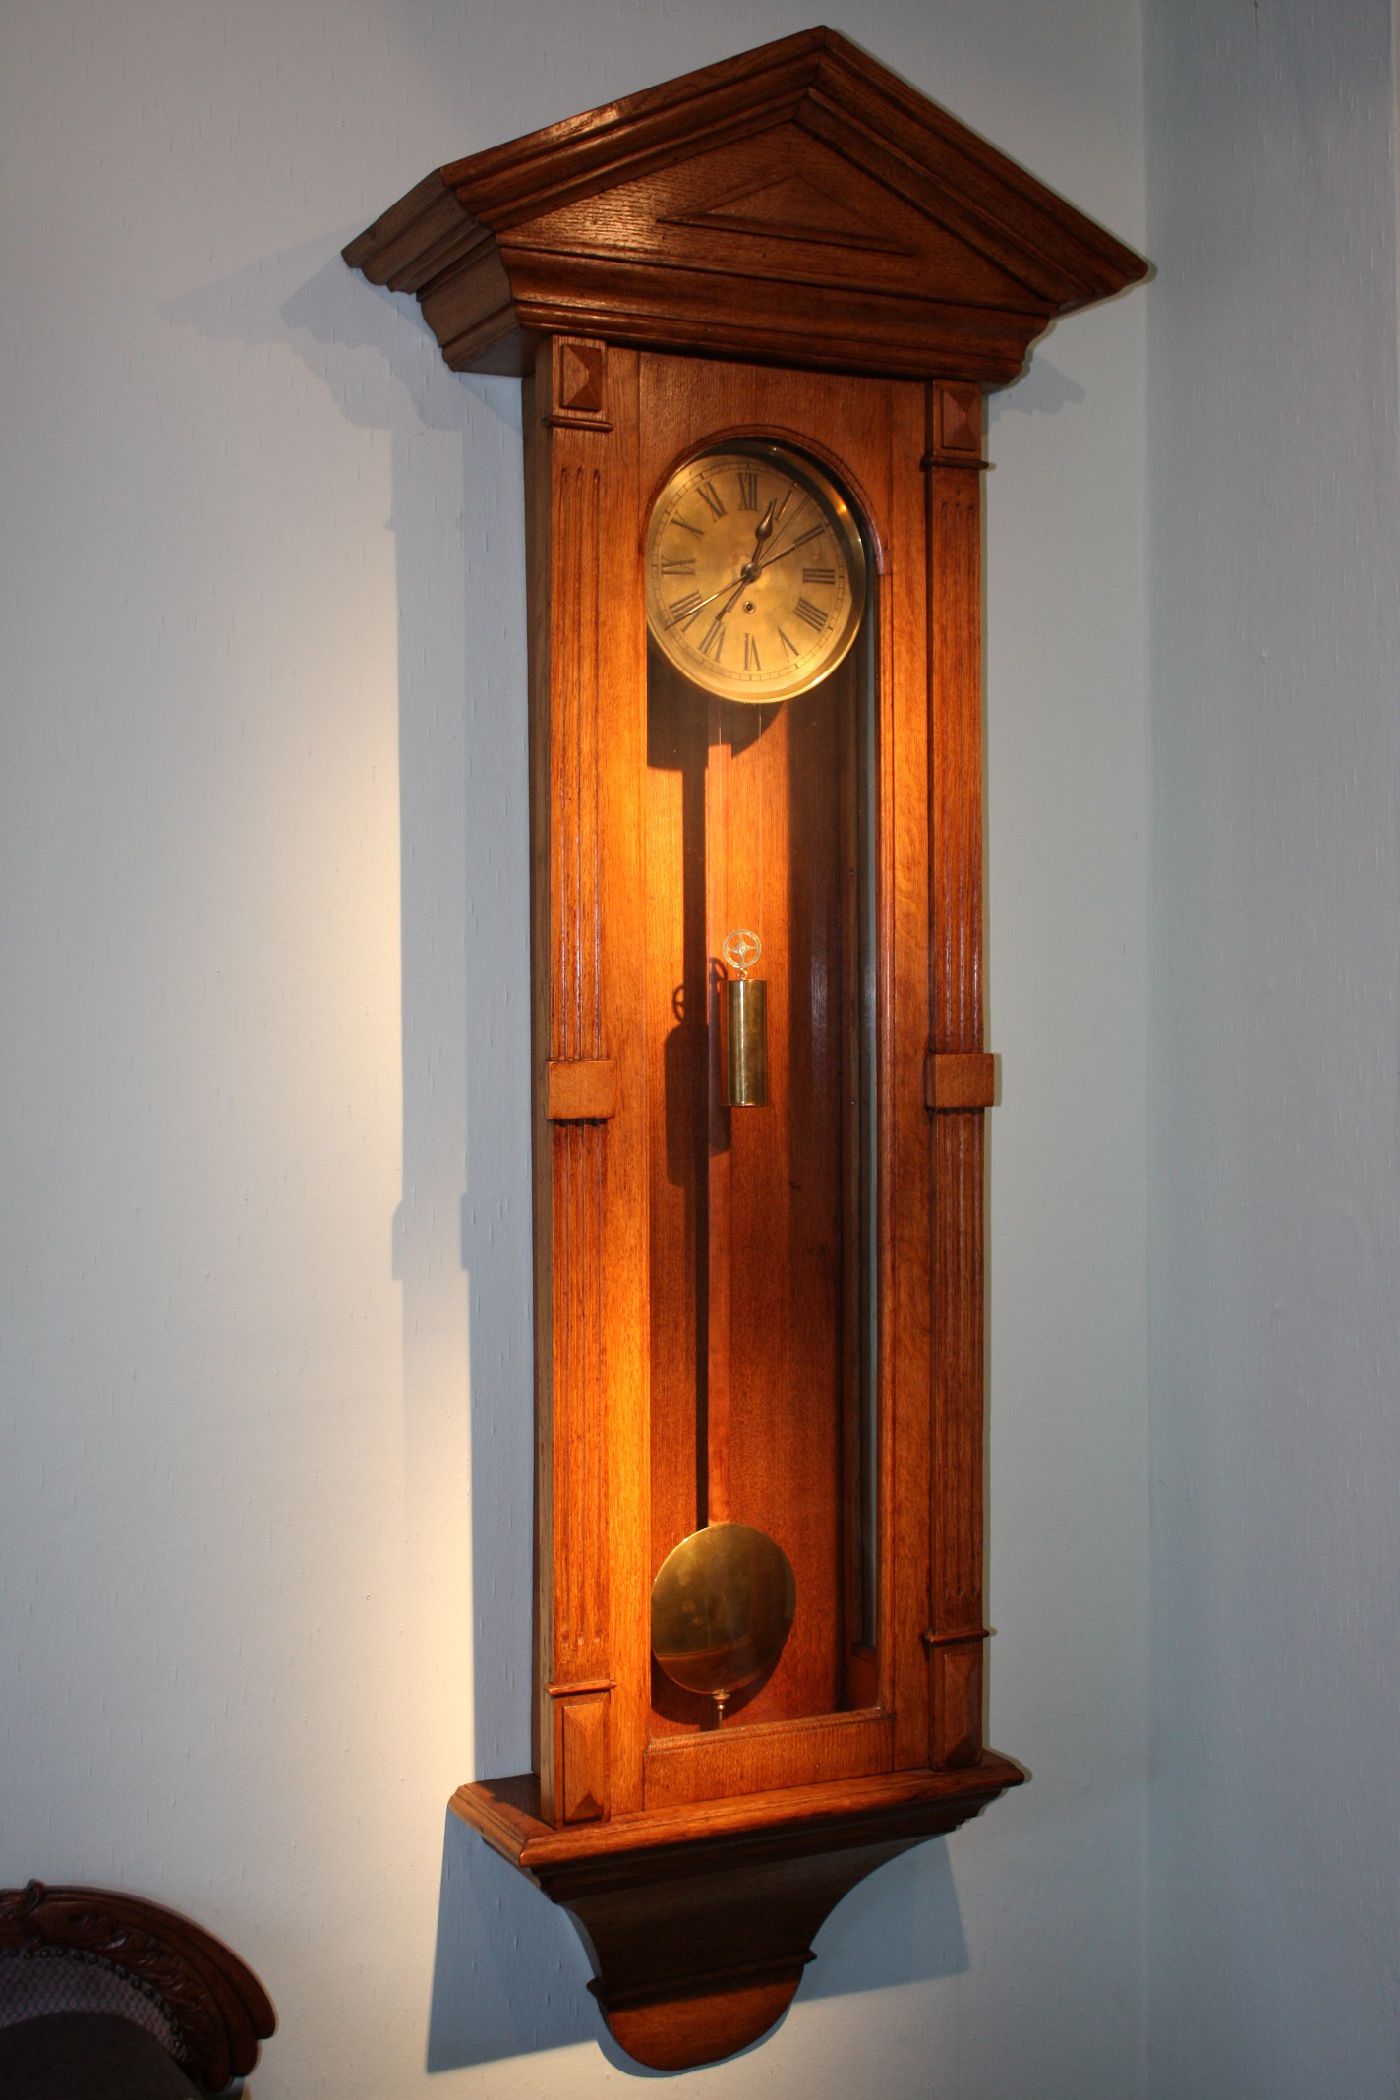 A large unique monumental German 1925 precision wall clock 10-day regulator with seconds pendulum by 'Gustav Becker'